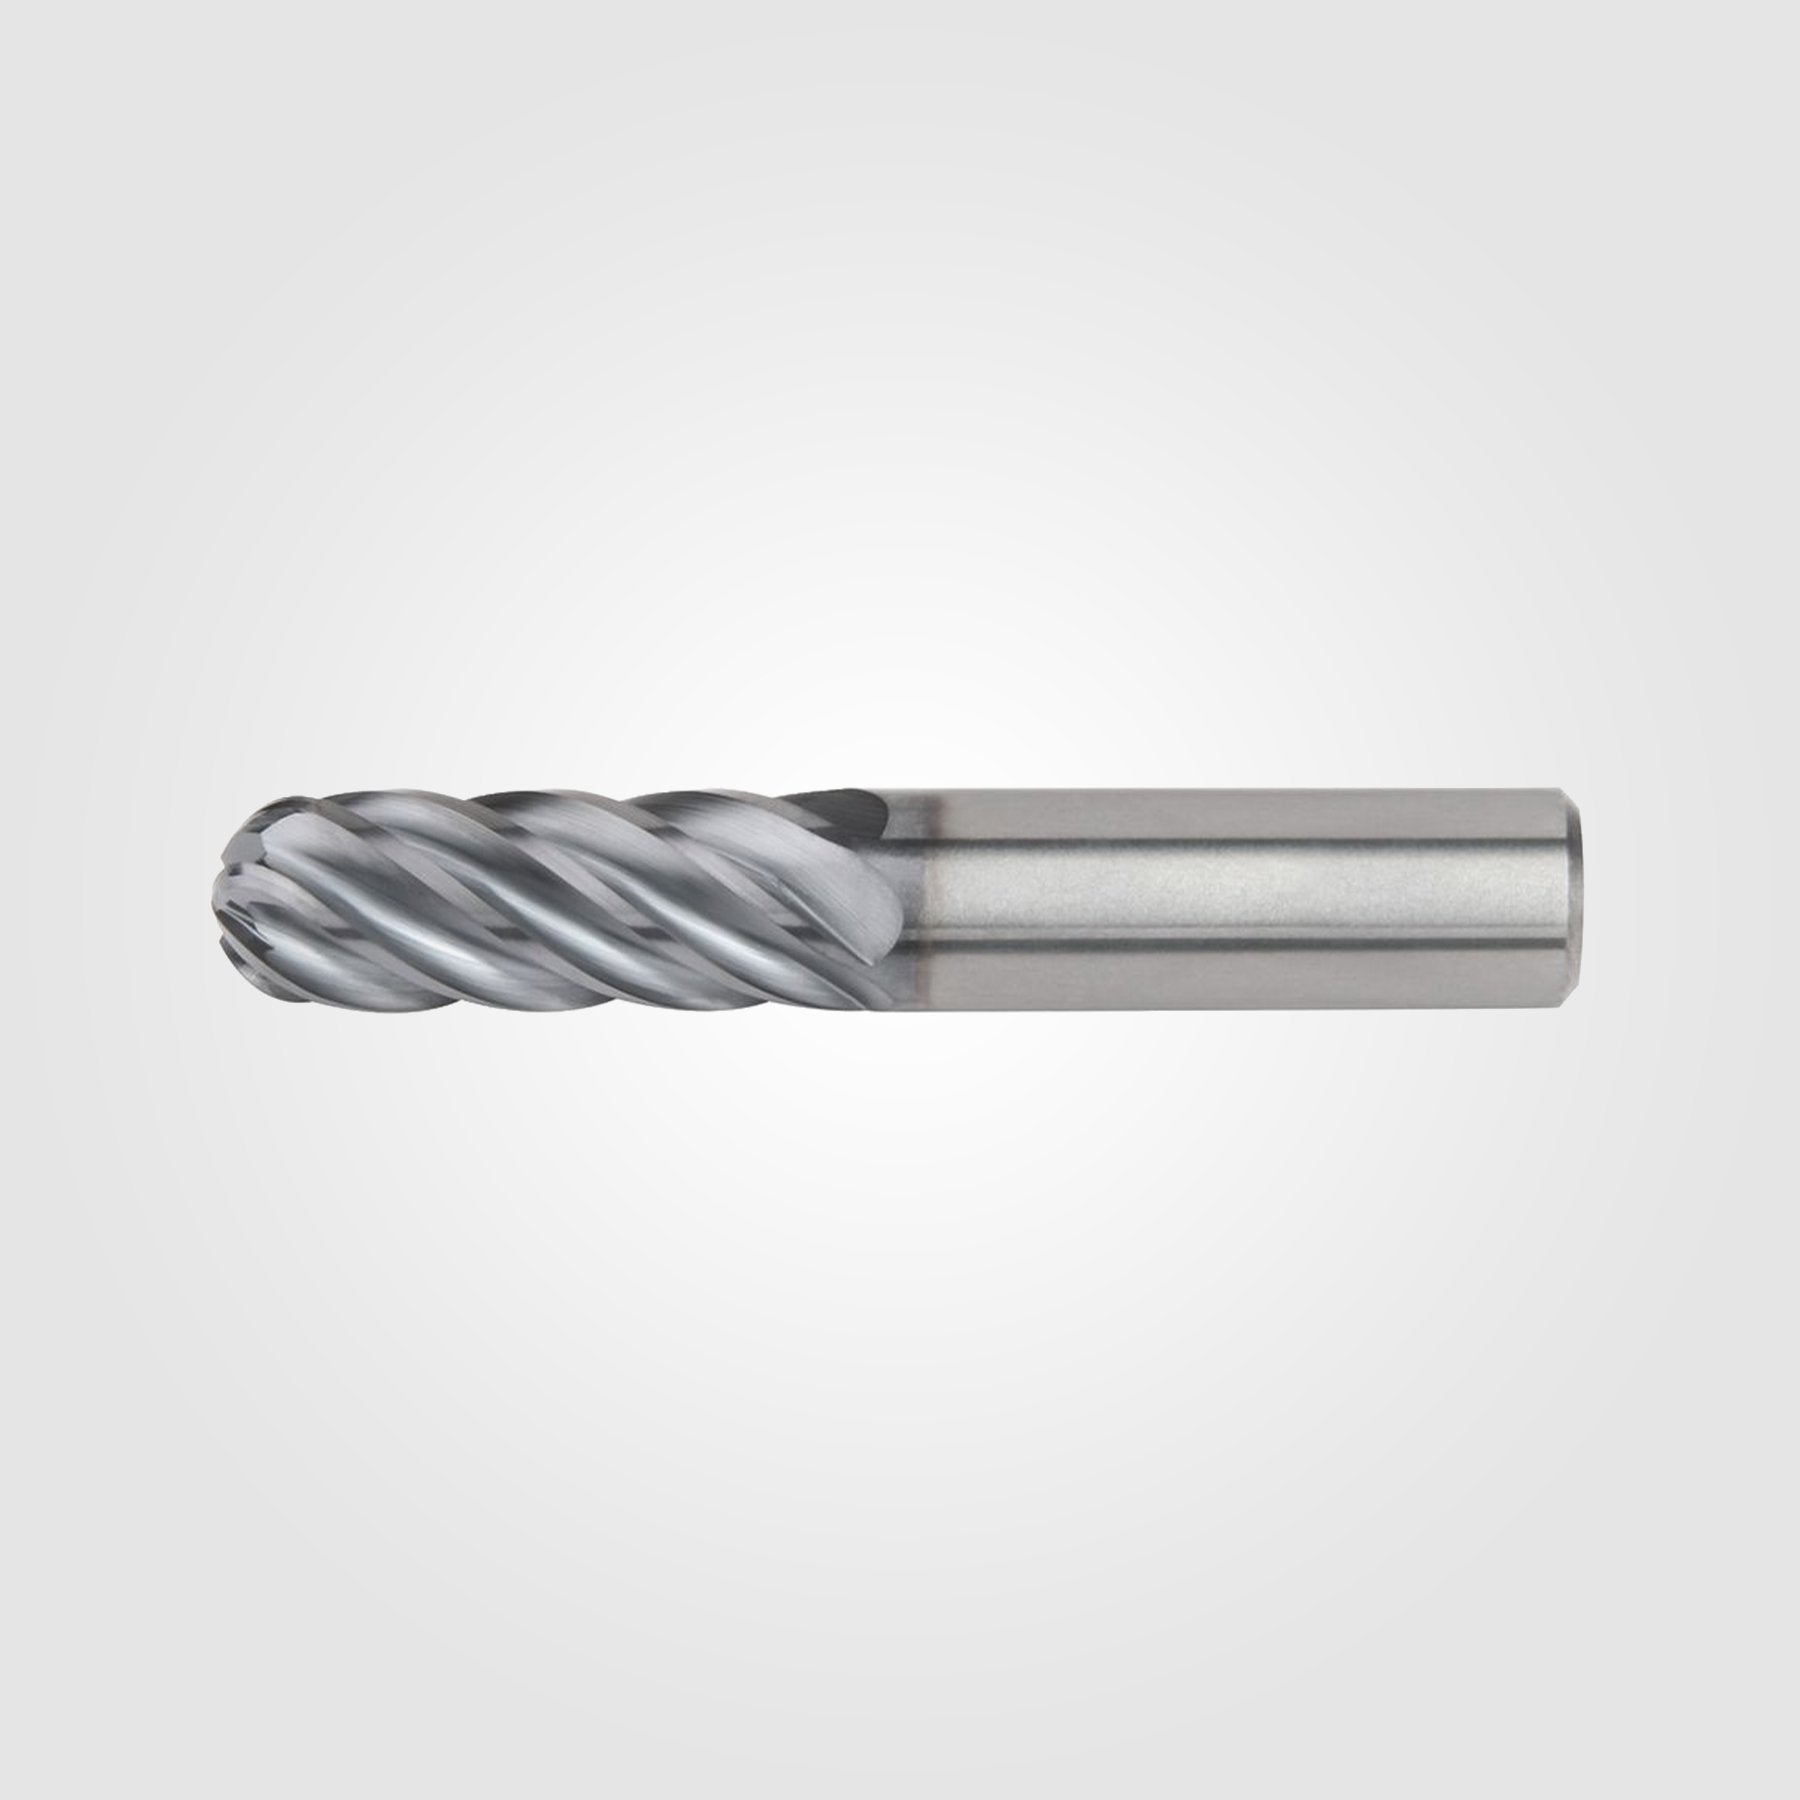 HARVI III (BALL NOSE AEROSPACE EXPANSION) | 1/2" x 1/2" x 1 1/2" x 3 1/2" | 6 FLUTE SOLID CARBIDE ENDMILL | 6113105